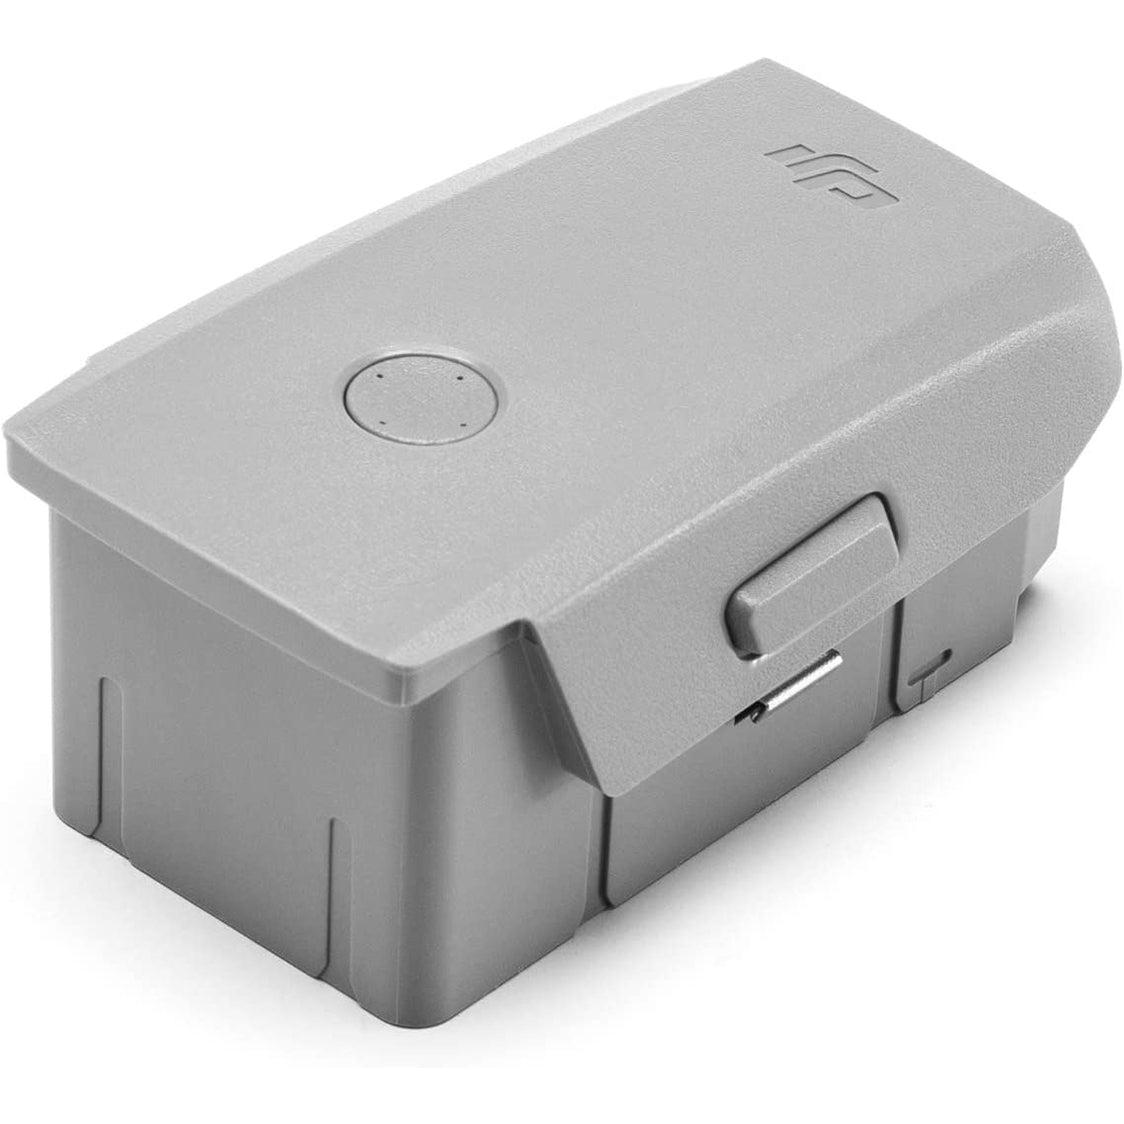 DJI Mavic Air 2 Intelligent Flight Battery 3500mAh 11.55V Lithium-Polymer Rechargeable Power Cell with 34 Minute Flight Time for RC Drones